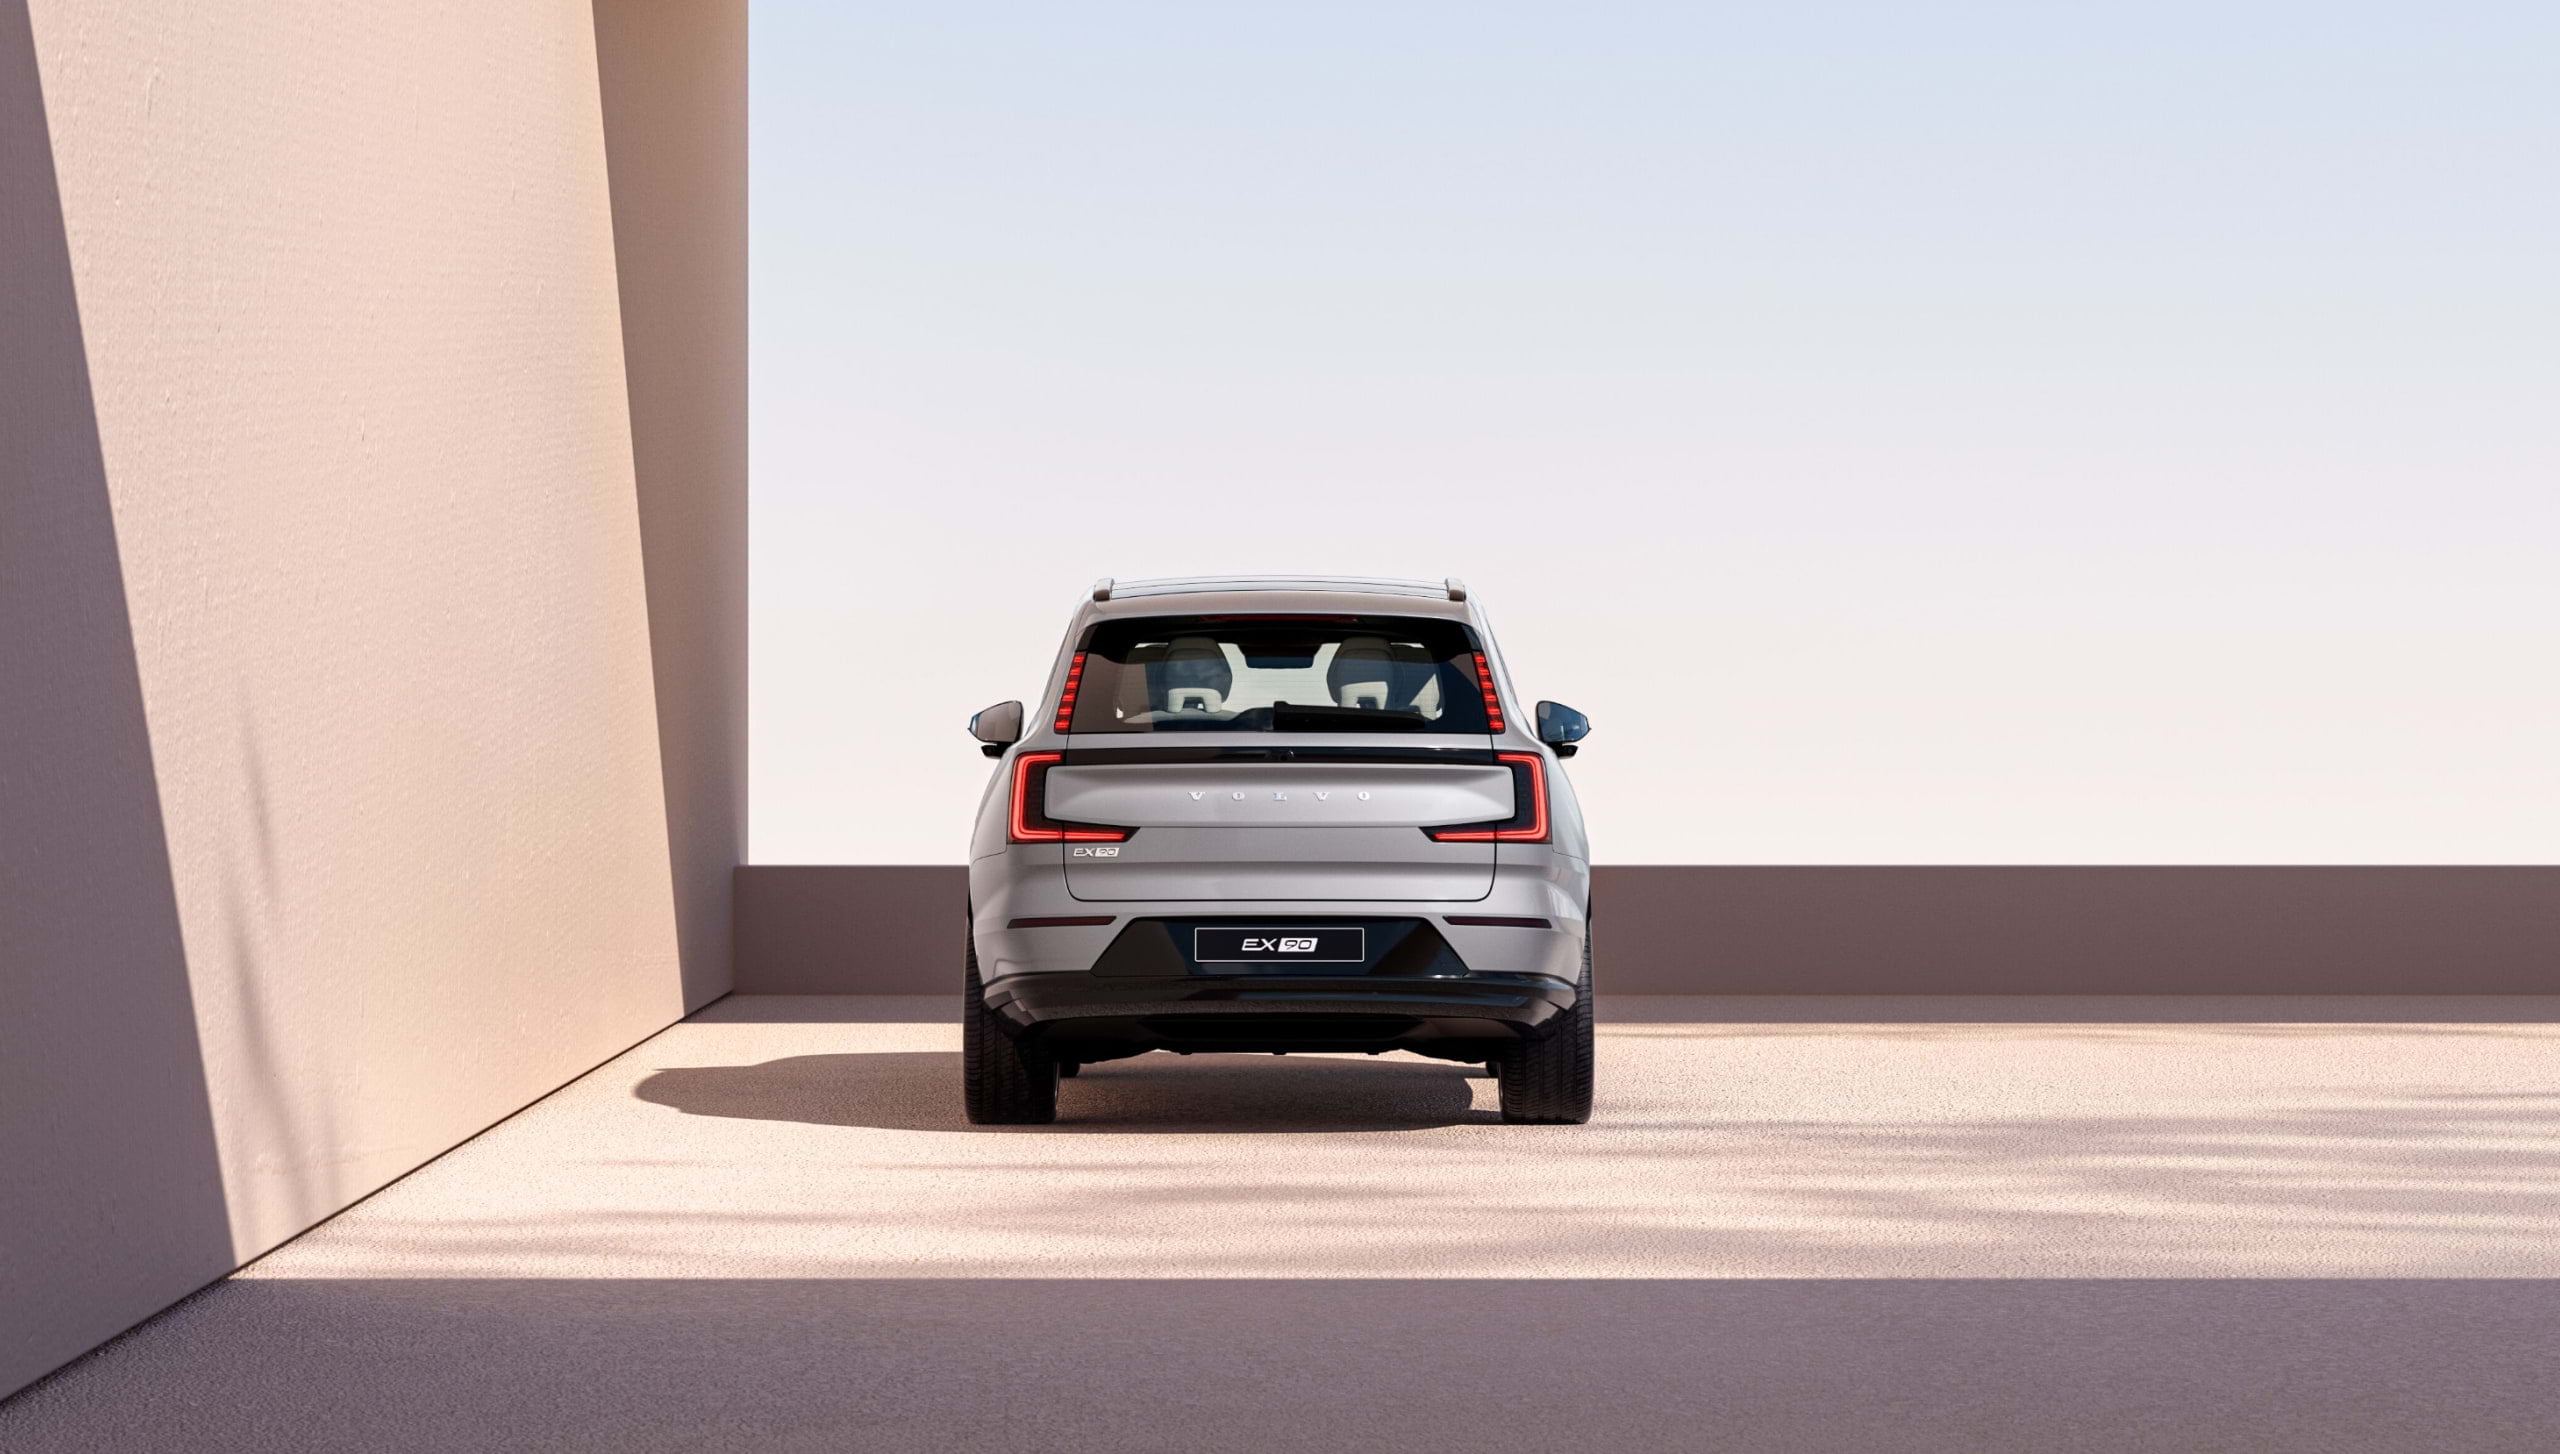 Flush design of the Volvo EX90 fully electric SUV